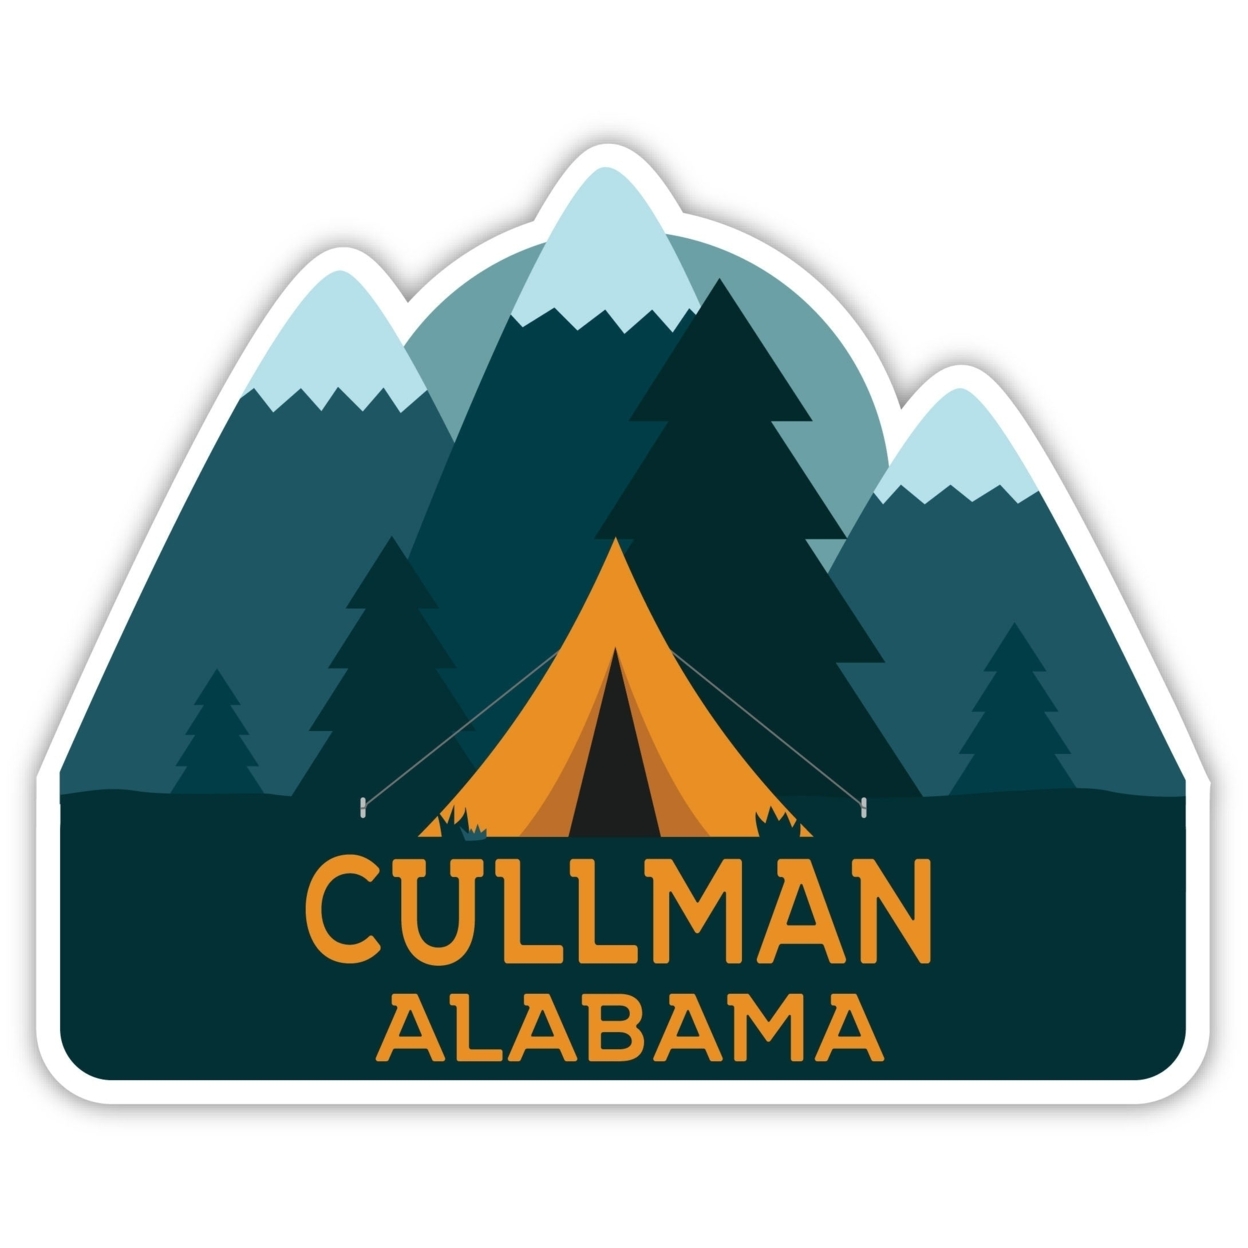 Cullman Alabama Souvenir Decorative Stickers (Choose Theme And Size) - 4-Pack, 2-Inch, Camp Life